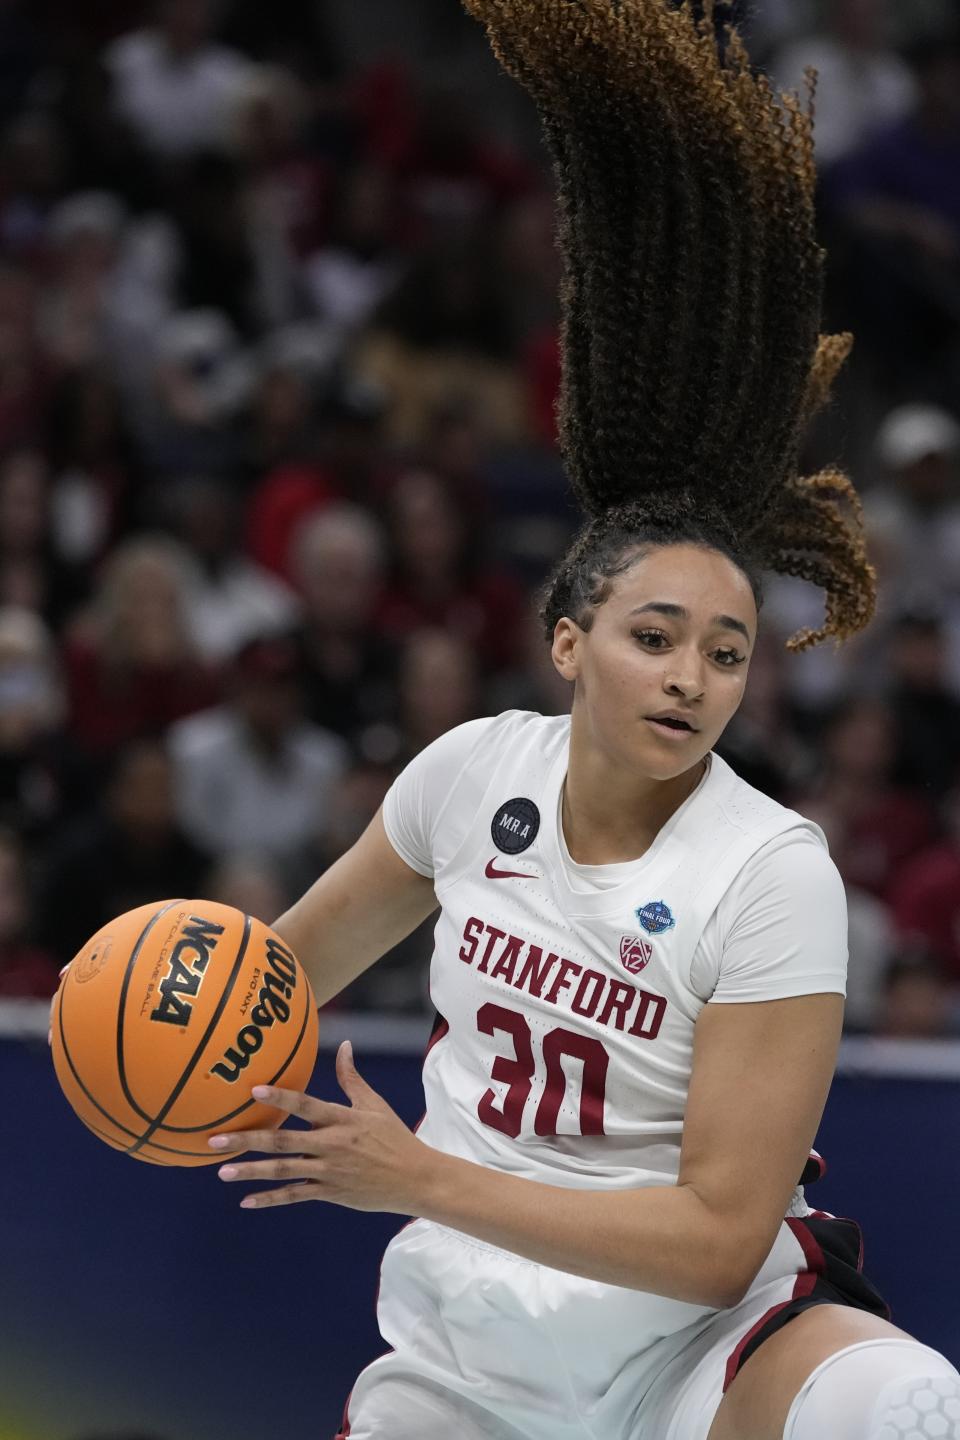 Stanford's Haley Jones grabs the ball during the first half of a college basketball game in the semifinal round of the Women's Final Four NCAA tournament Friday, April 1, 2022, in Minneapolis. (AP Photo/Charlie Neibergall)